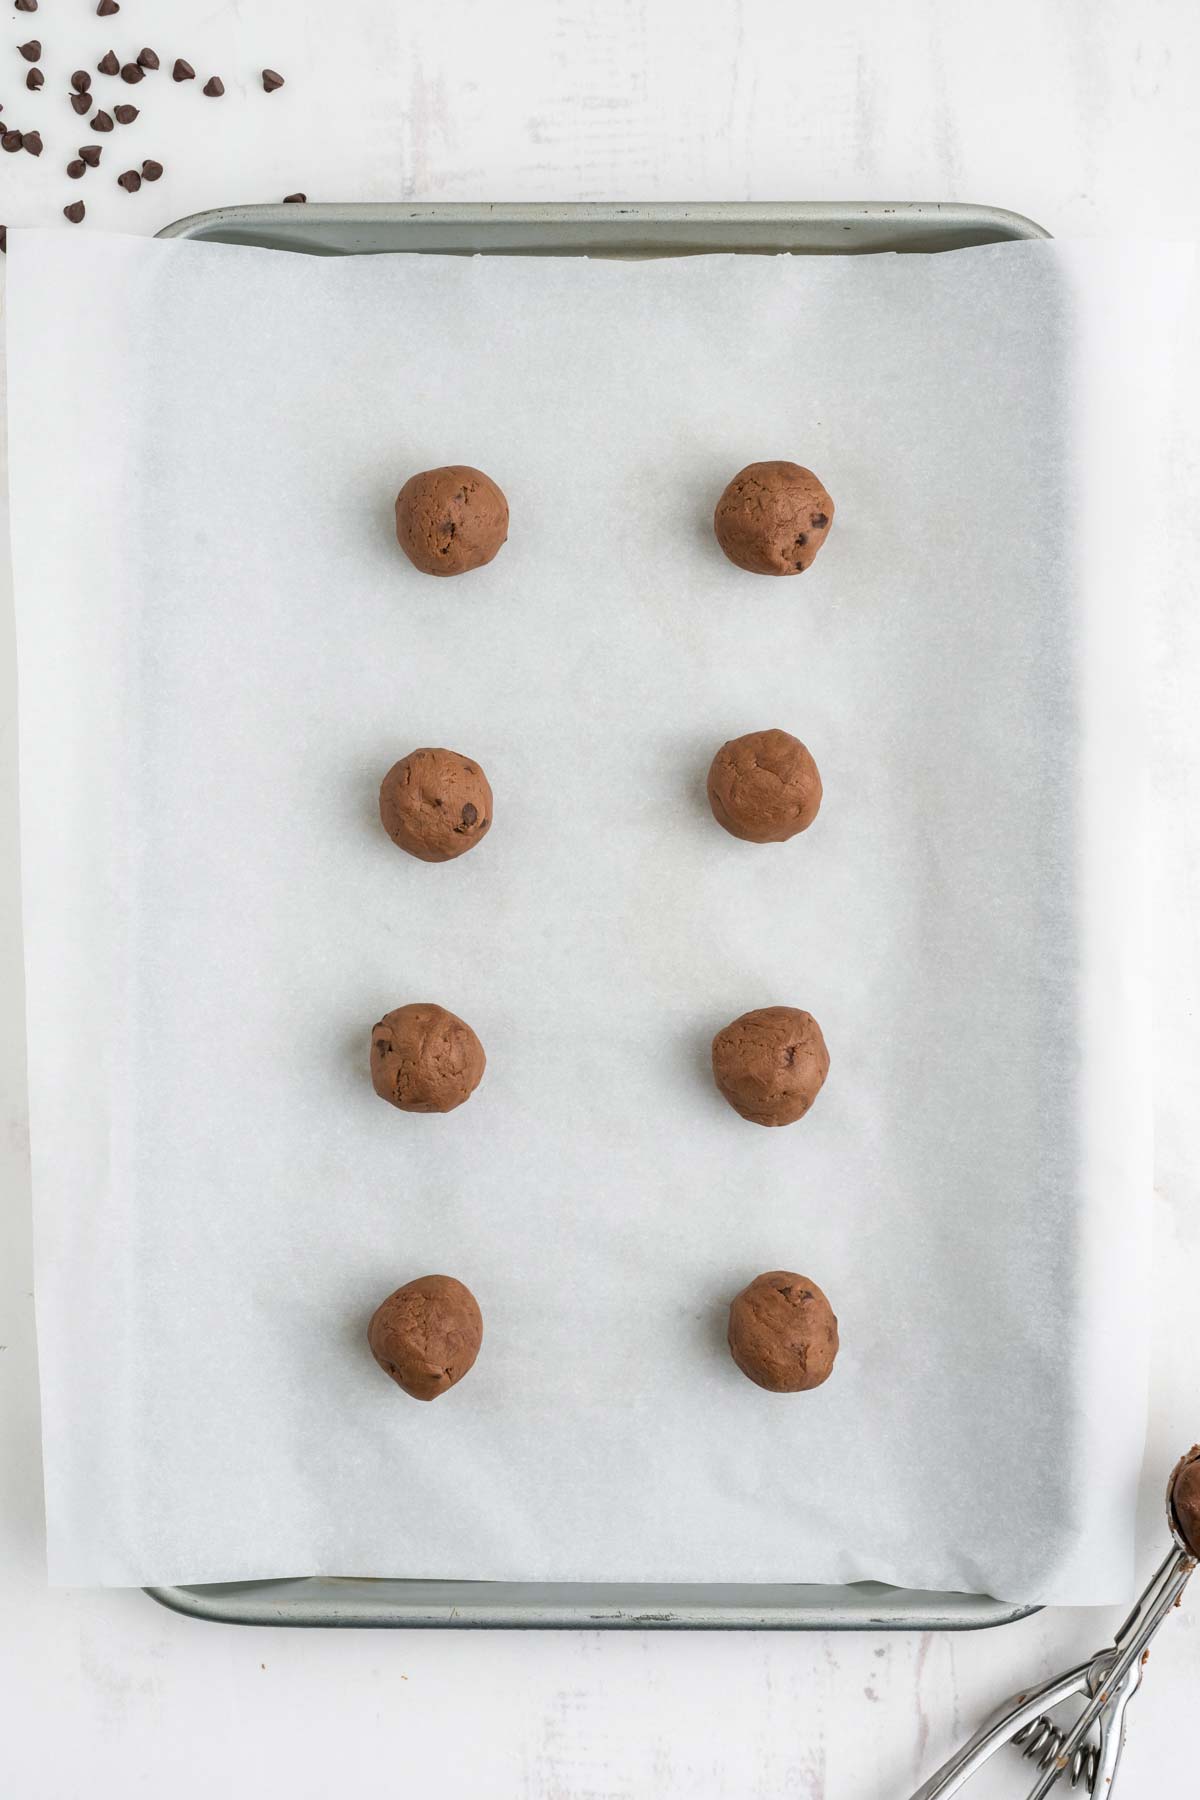 Chocolate cookie dough shaped into balls on a baking tray.